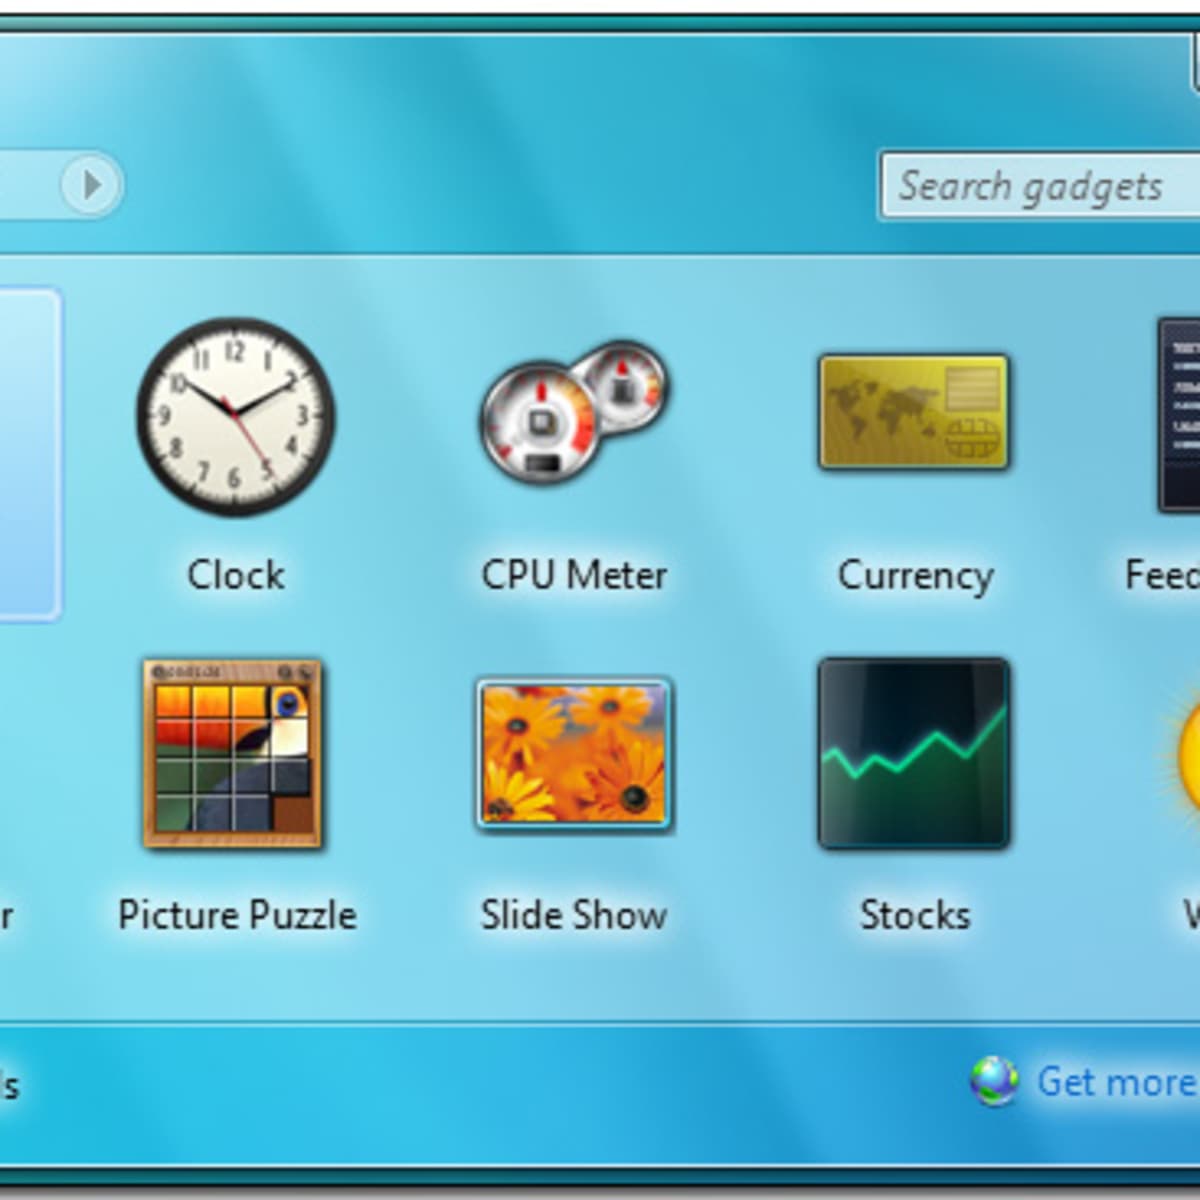 Windows 7 Desktop Gadgets: Clock, Sticky Notes, and More - HubPages